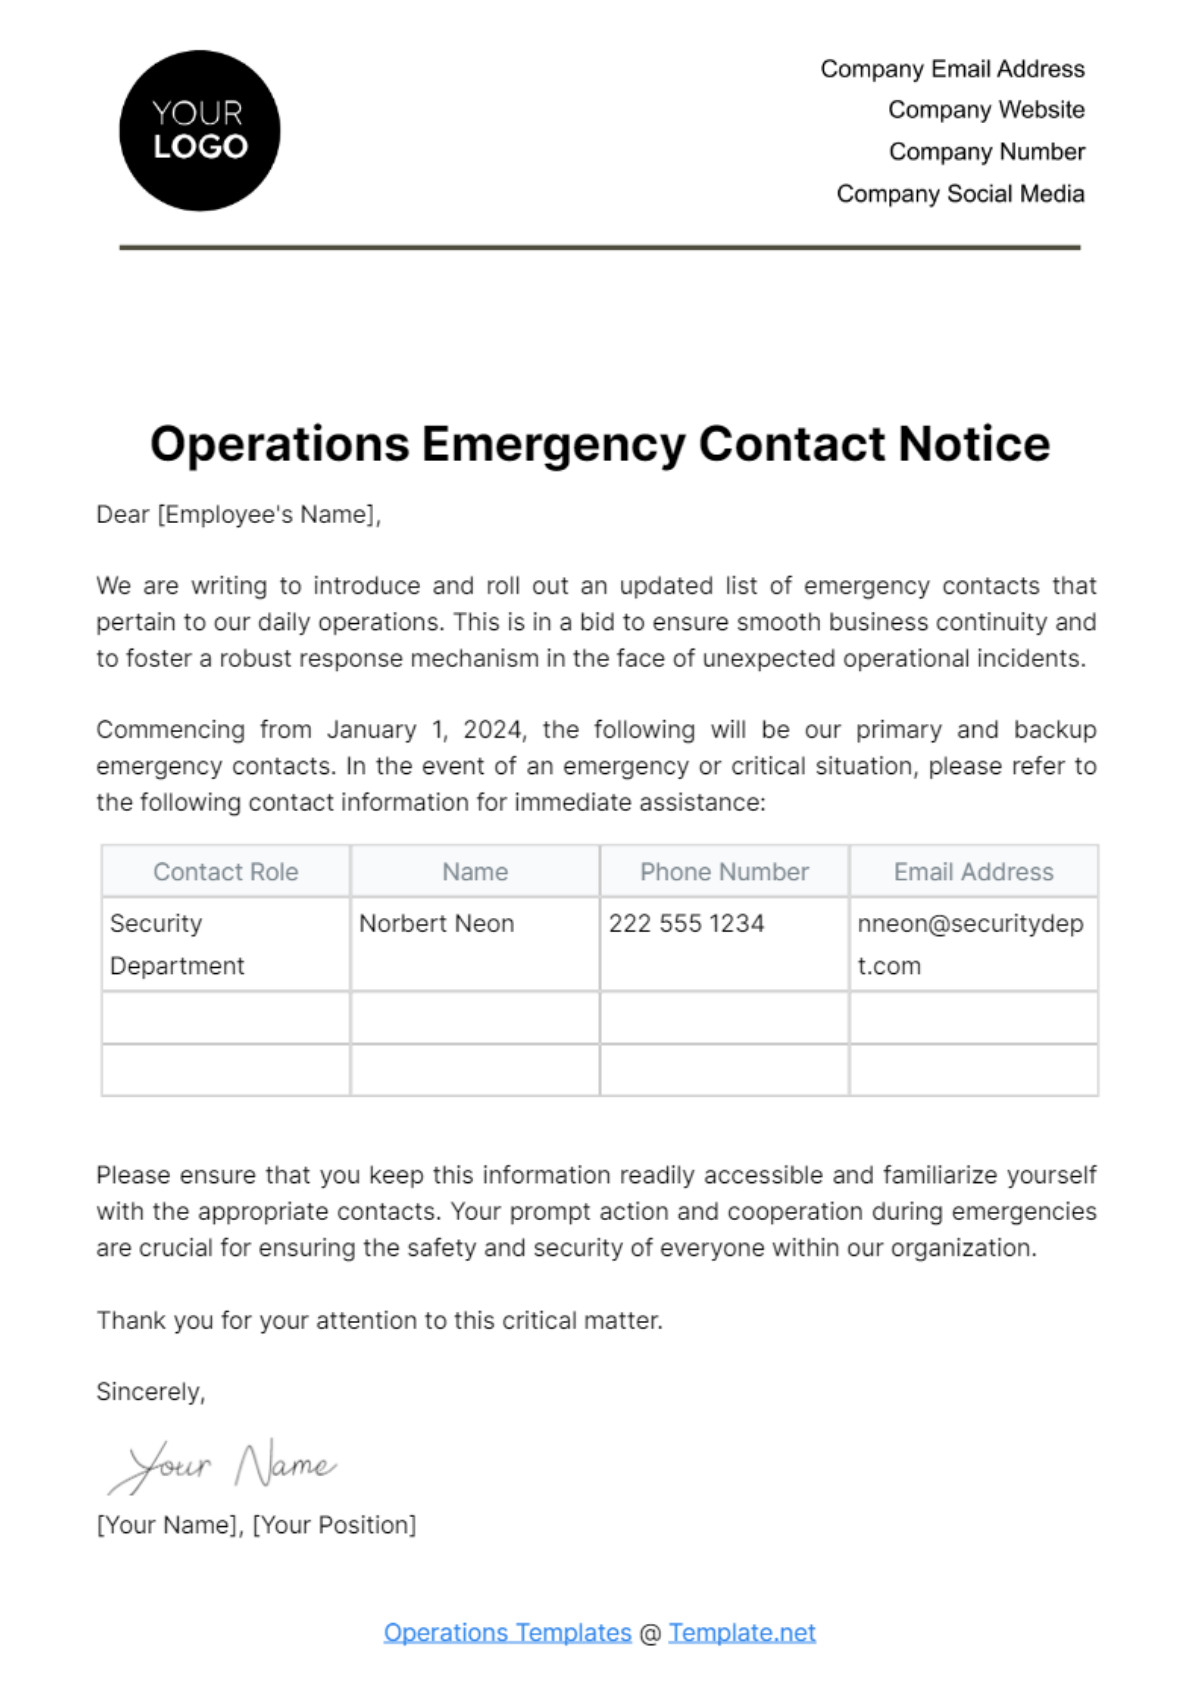 Operations Emergency Contact Notice Template